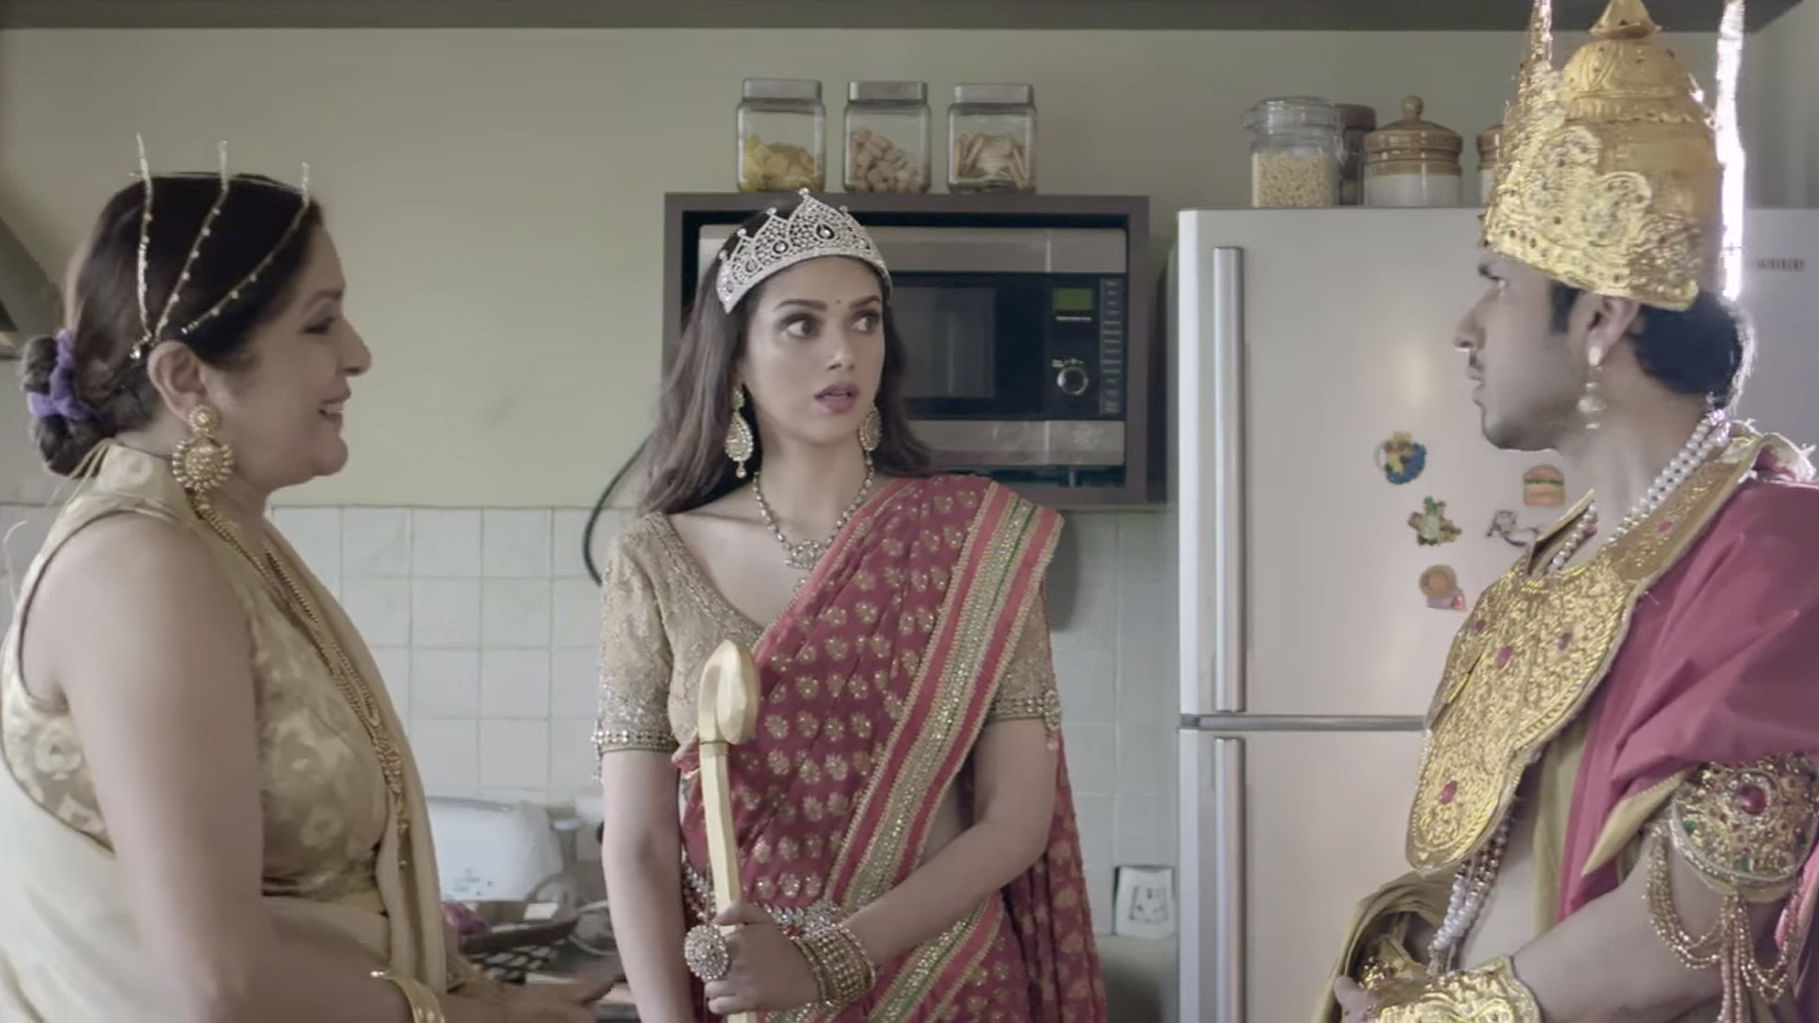 Mama’s boys is the perfect interpretation of what would have happened if Draupadi was to marry five men today. (Photo Courtesy: Screengrab of <a href="https://www.youtube.com/watch?v=YKAXzjnAbA0">Mama’s Boys</a>)